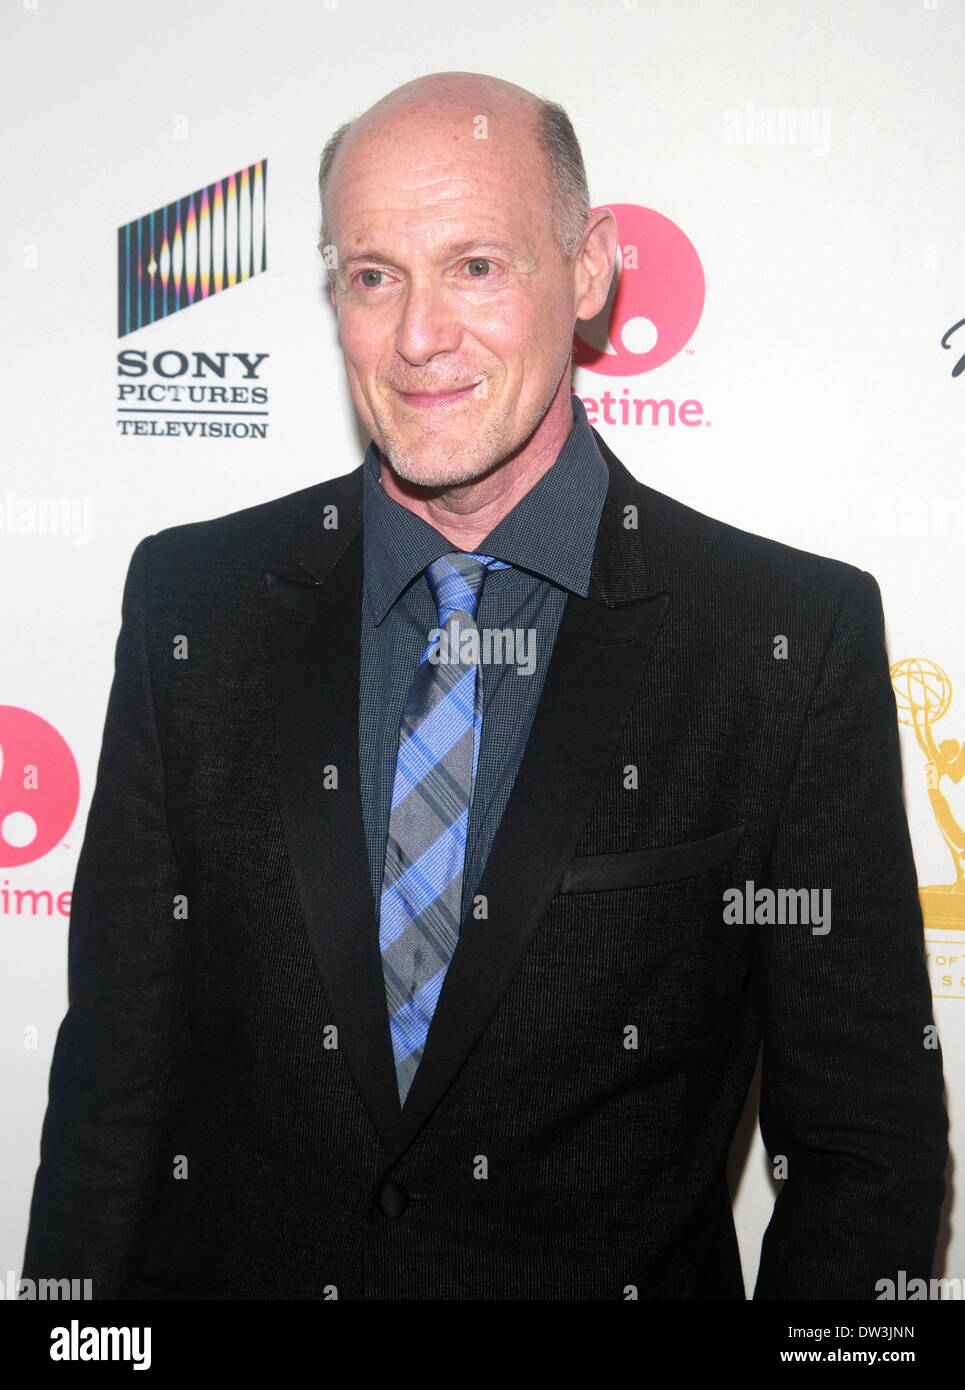 Neil Meron attends the world premiere of the Lifetime Original Movie Event, Steel Magnolias held at the Paris Theater Featuring: Neil Meron Where: New York, United States When: 03 Oct 2012 Stock Photo